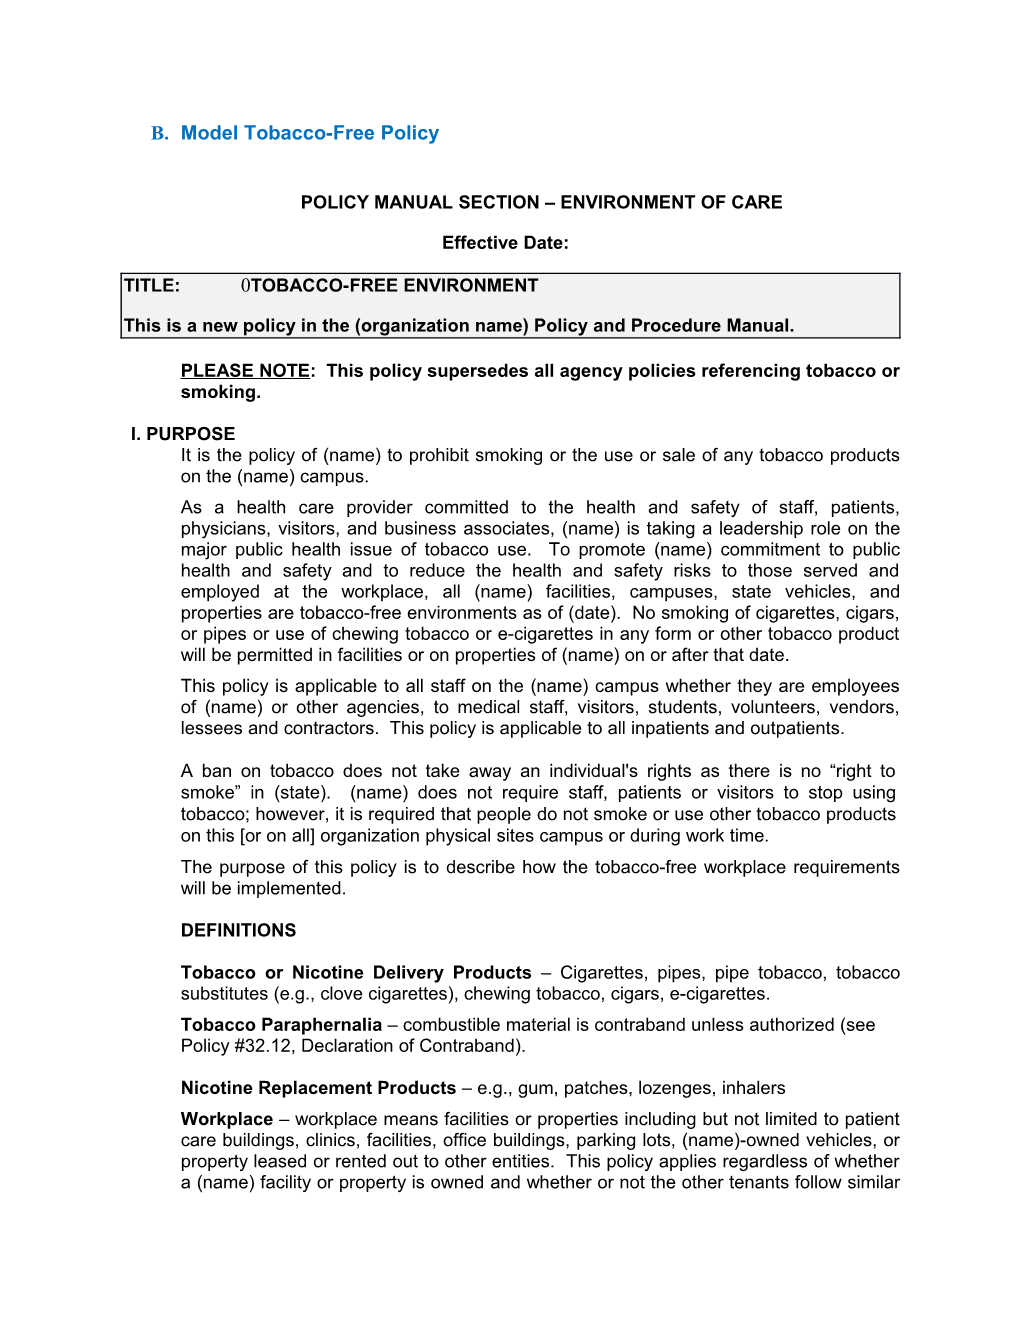 Policy Manual Section Environment of Care